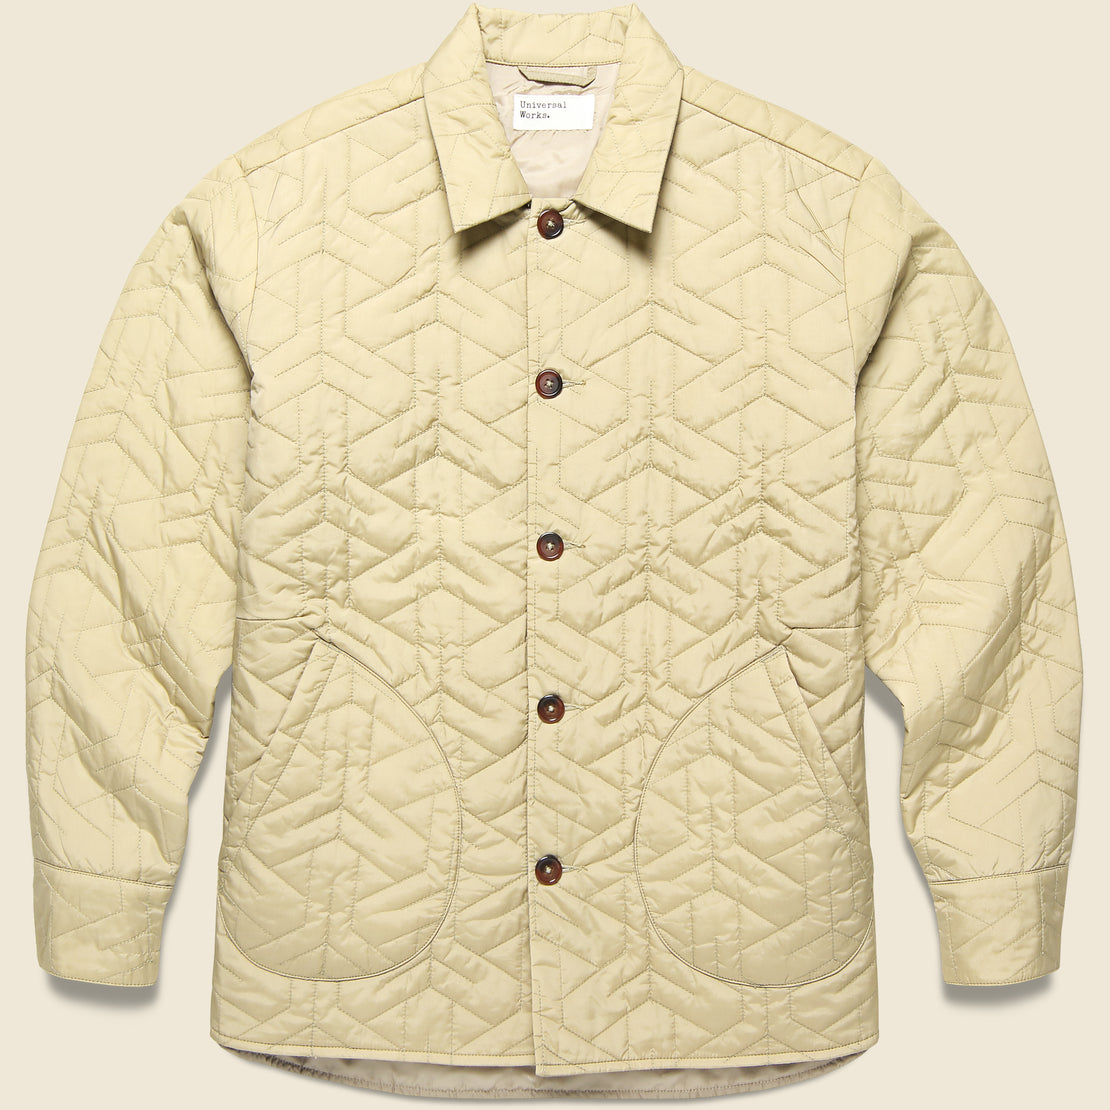 Universal Works Quilted Travail Jacket - Pale Khaki